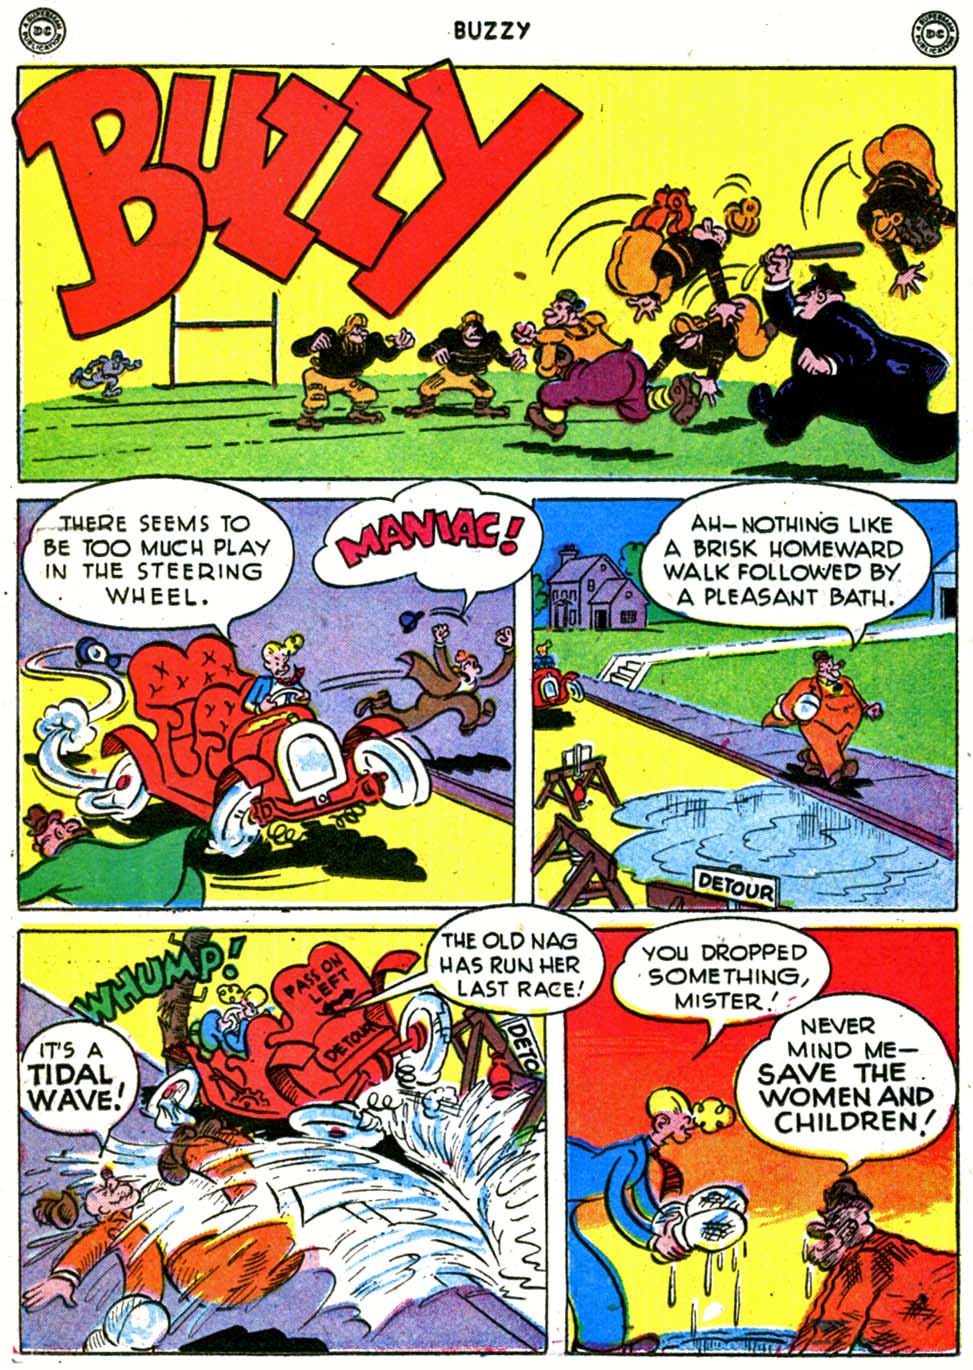 Read online Buzzy comic -  Issue #12 - 32